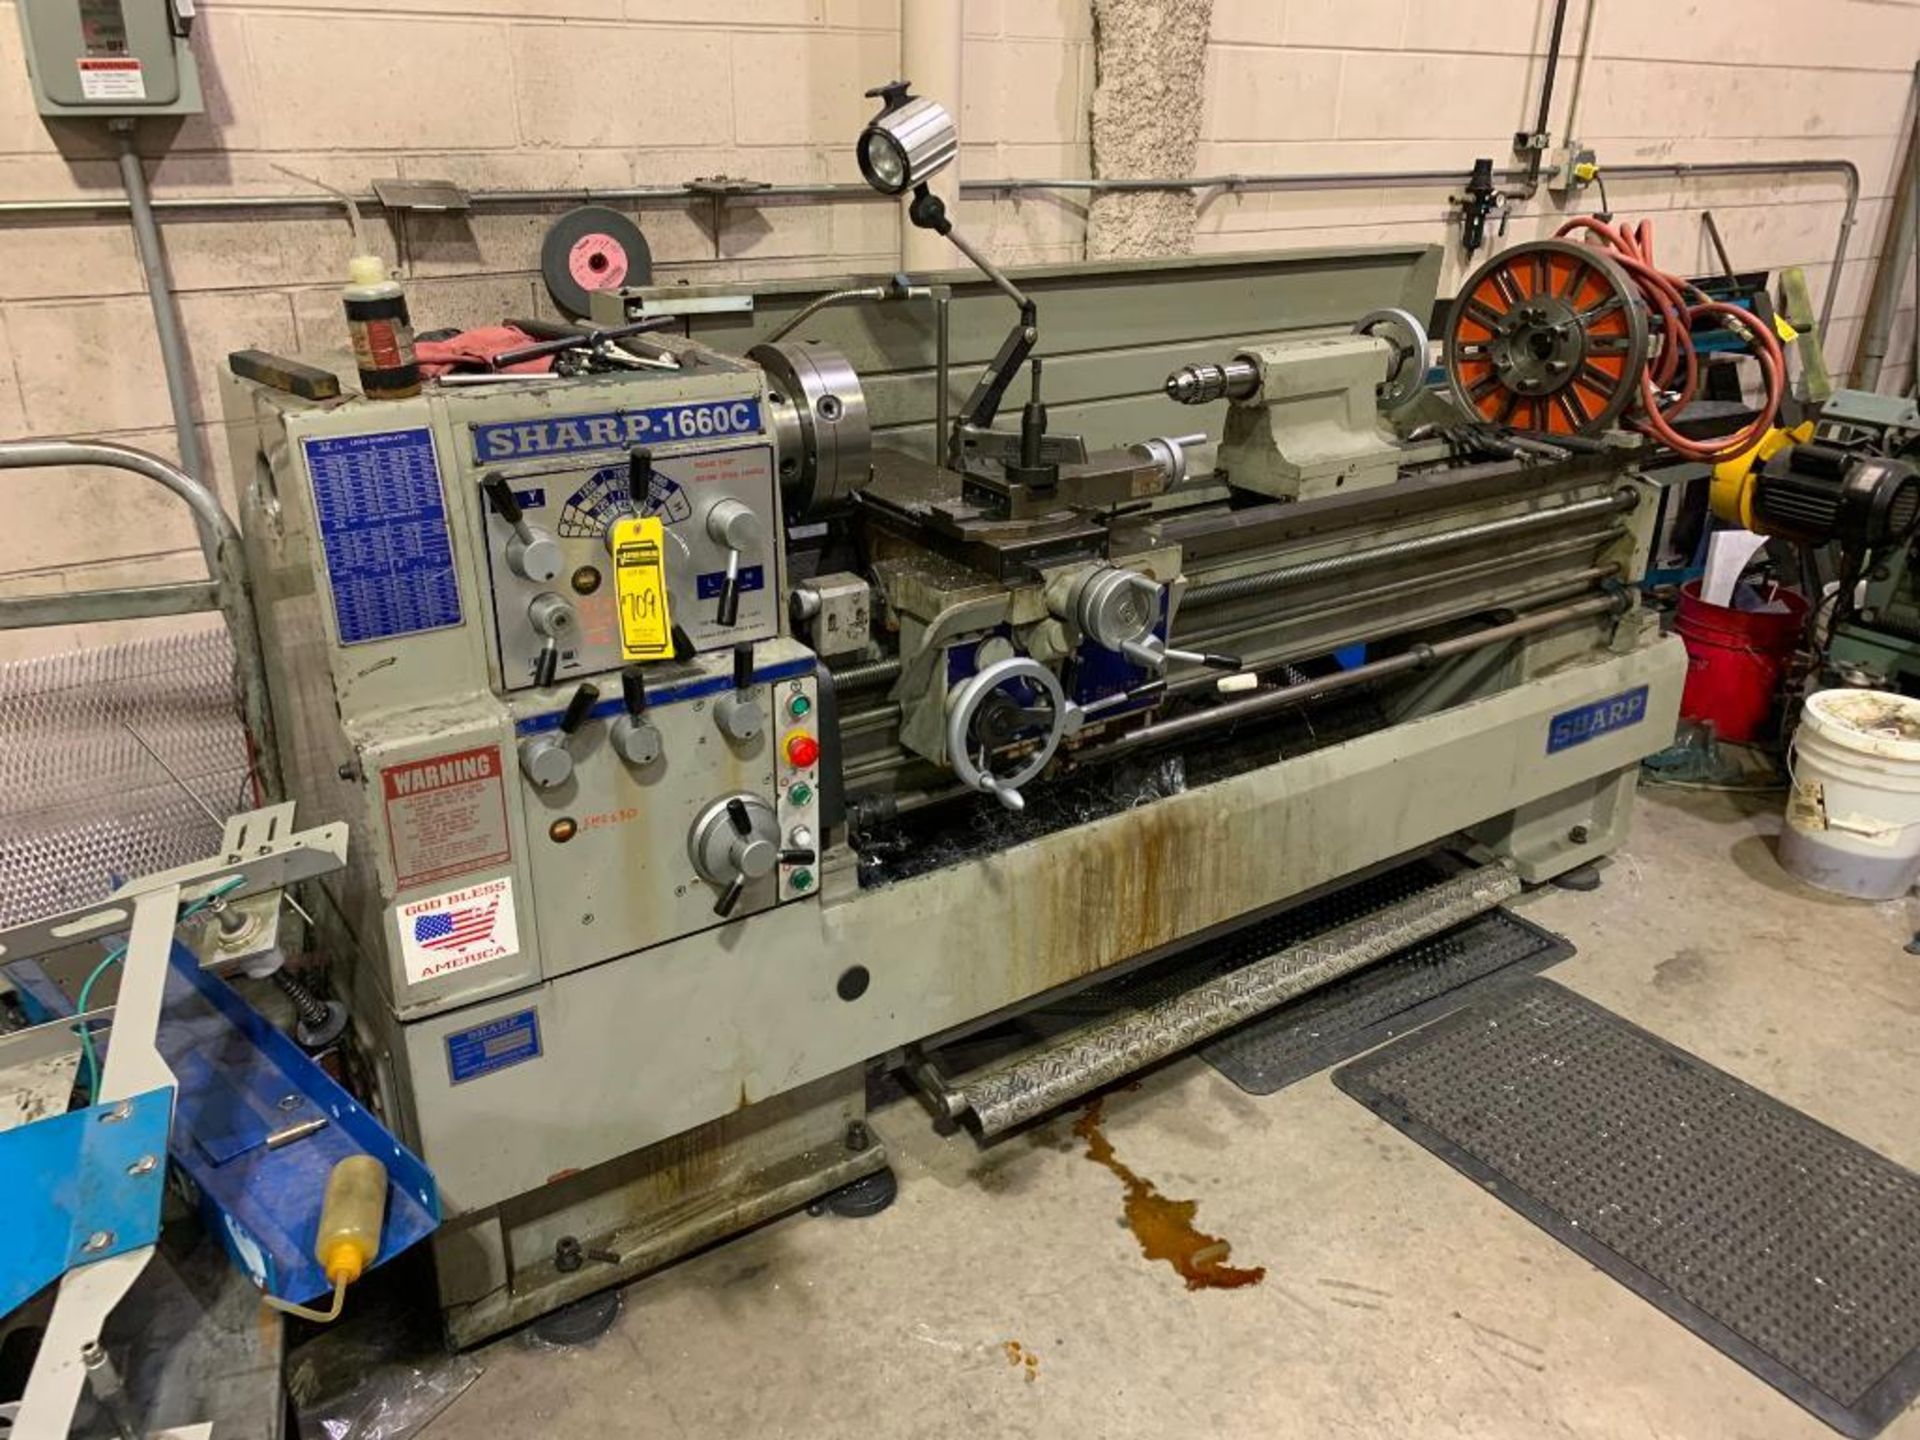 2001 Sharpe 1160C Lathe, Model 1660-0, 10" 3-Jaw Chuck, Cross-Slide, Tailstock, Face Plate, Steady R - Image 2 of 10